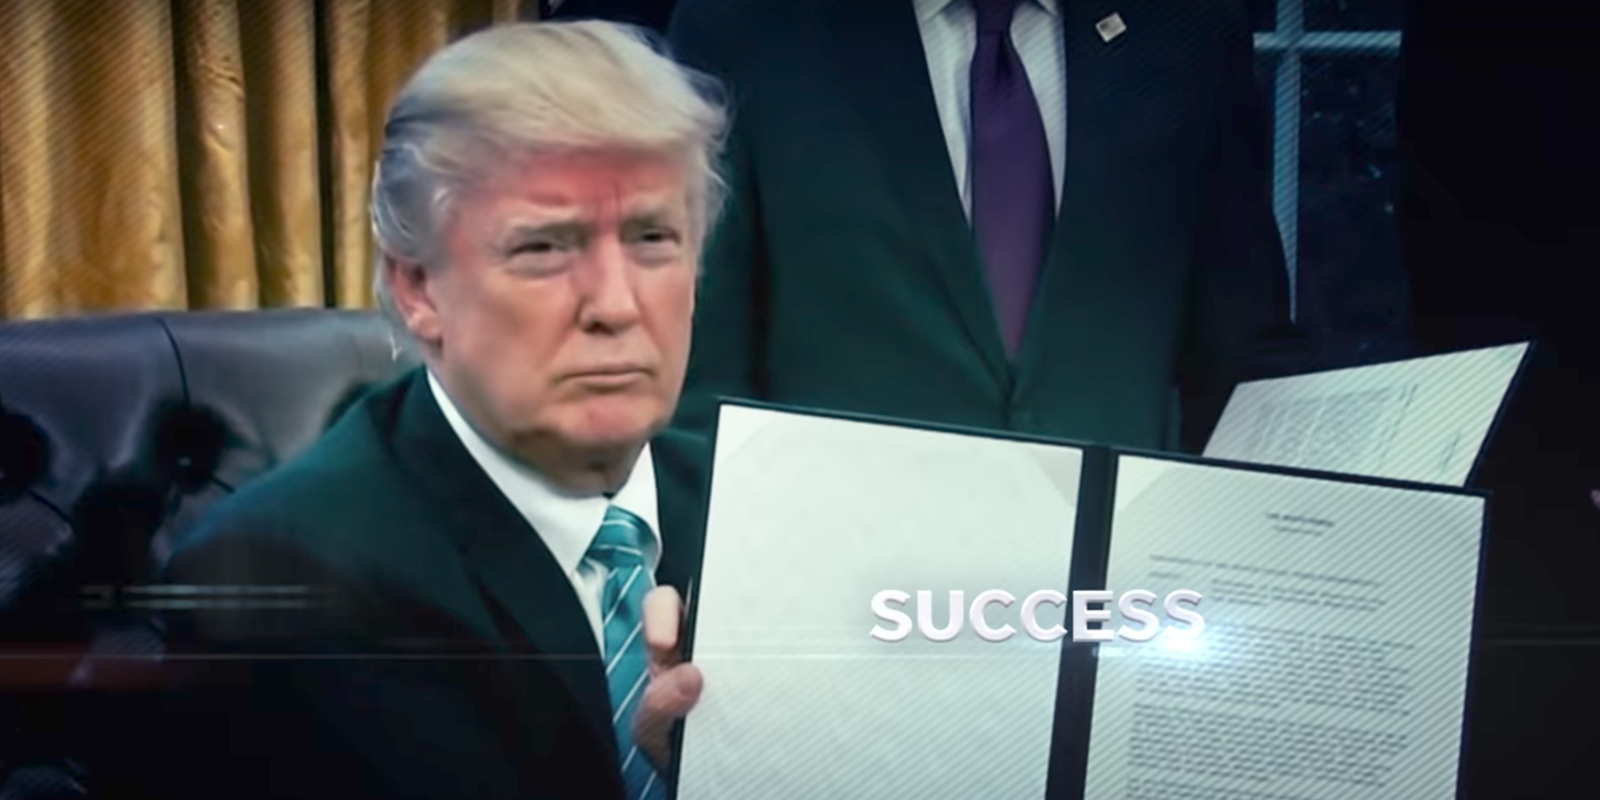 Donald Trump 2020 Campaign Ad on First 100 Days